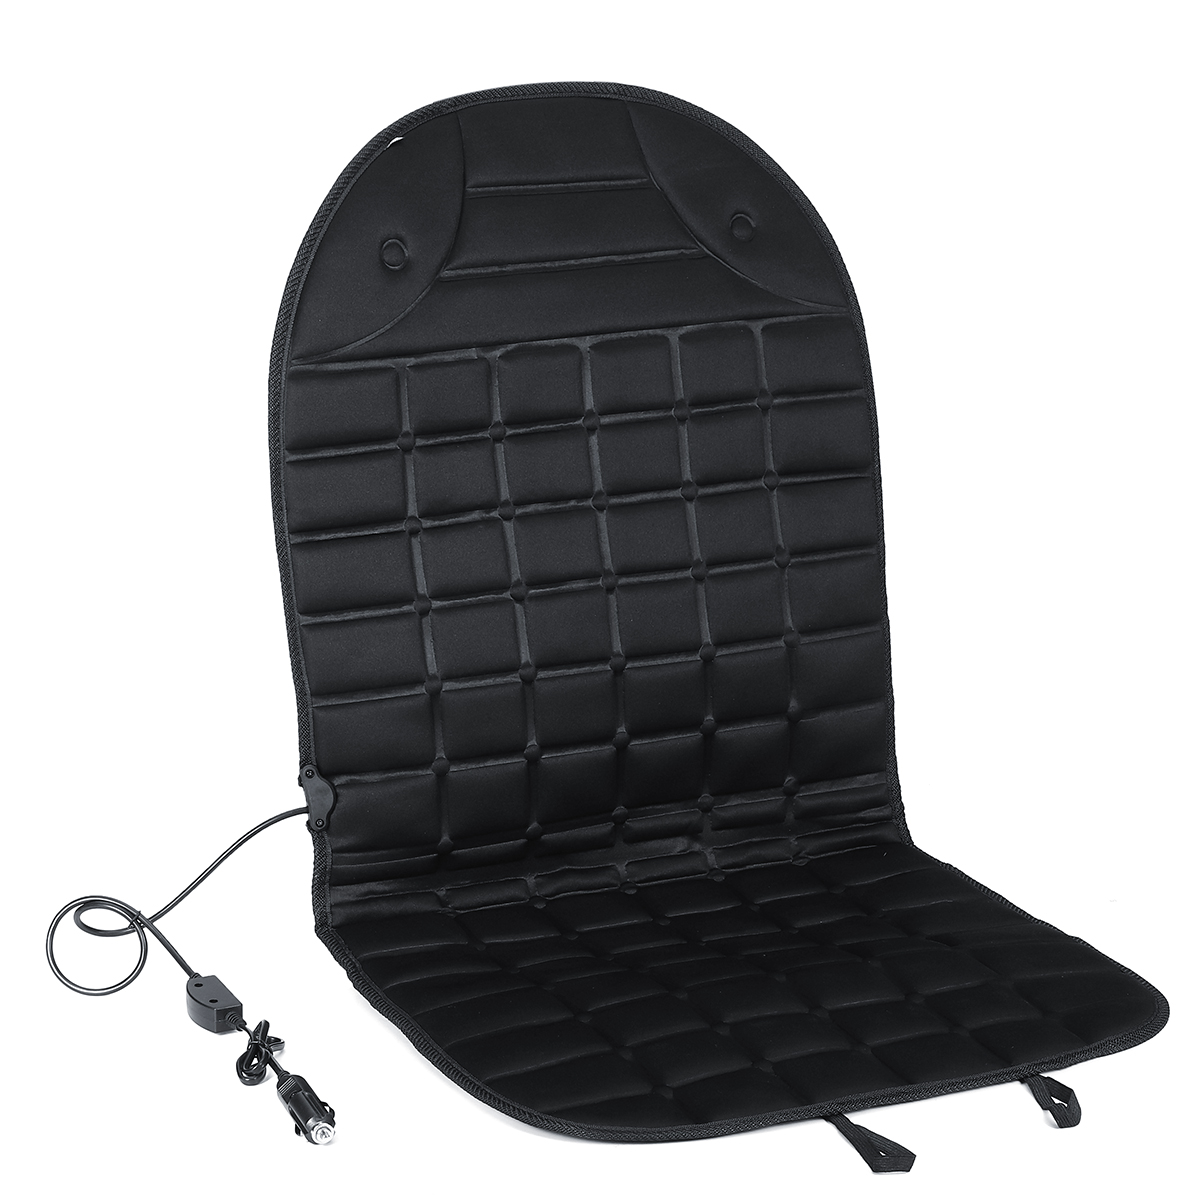 12V 30W Polyester Car Front Seat Heated Cushion Seat Warmer Winter Household Cover Electric Mat - Auto GoShop